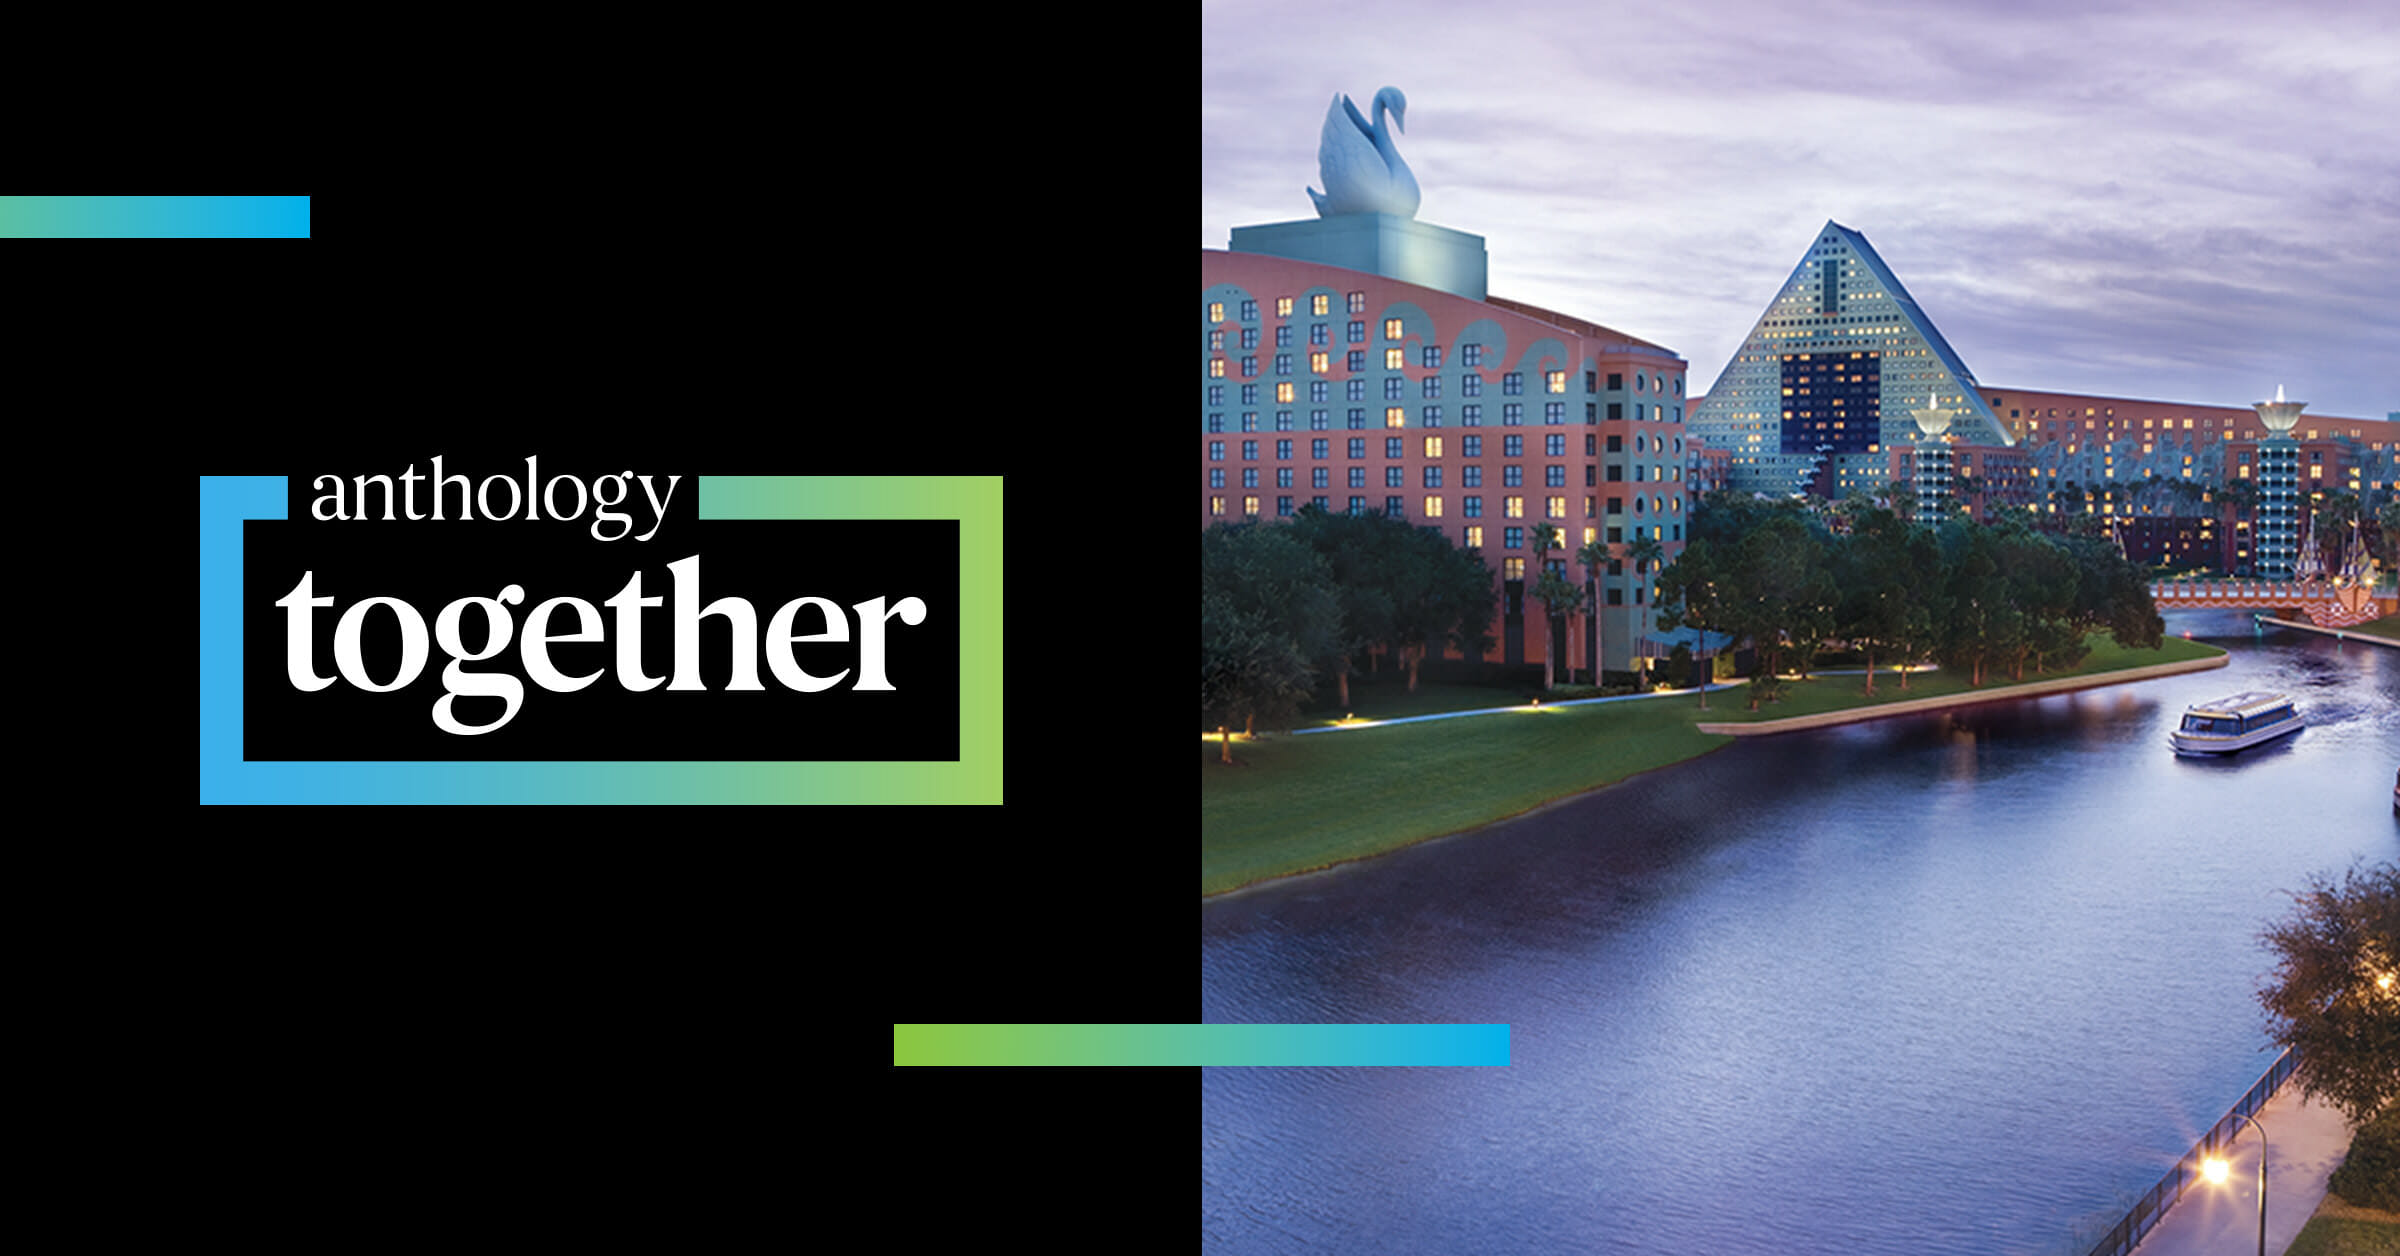 Anthology Together logo next to a photo of the Swan & Dolphin resort